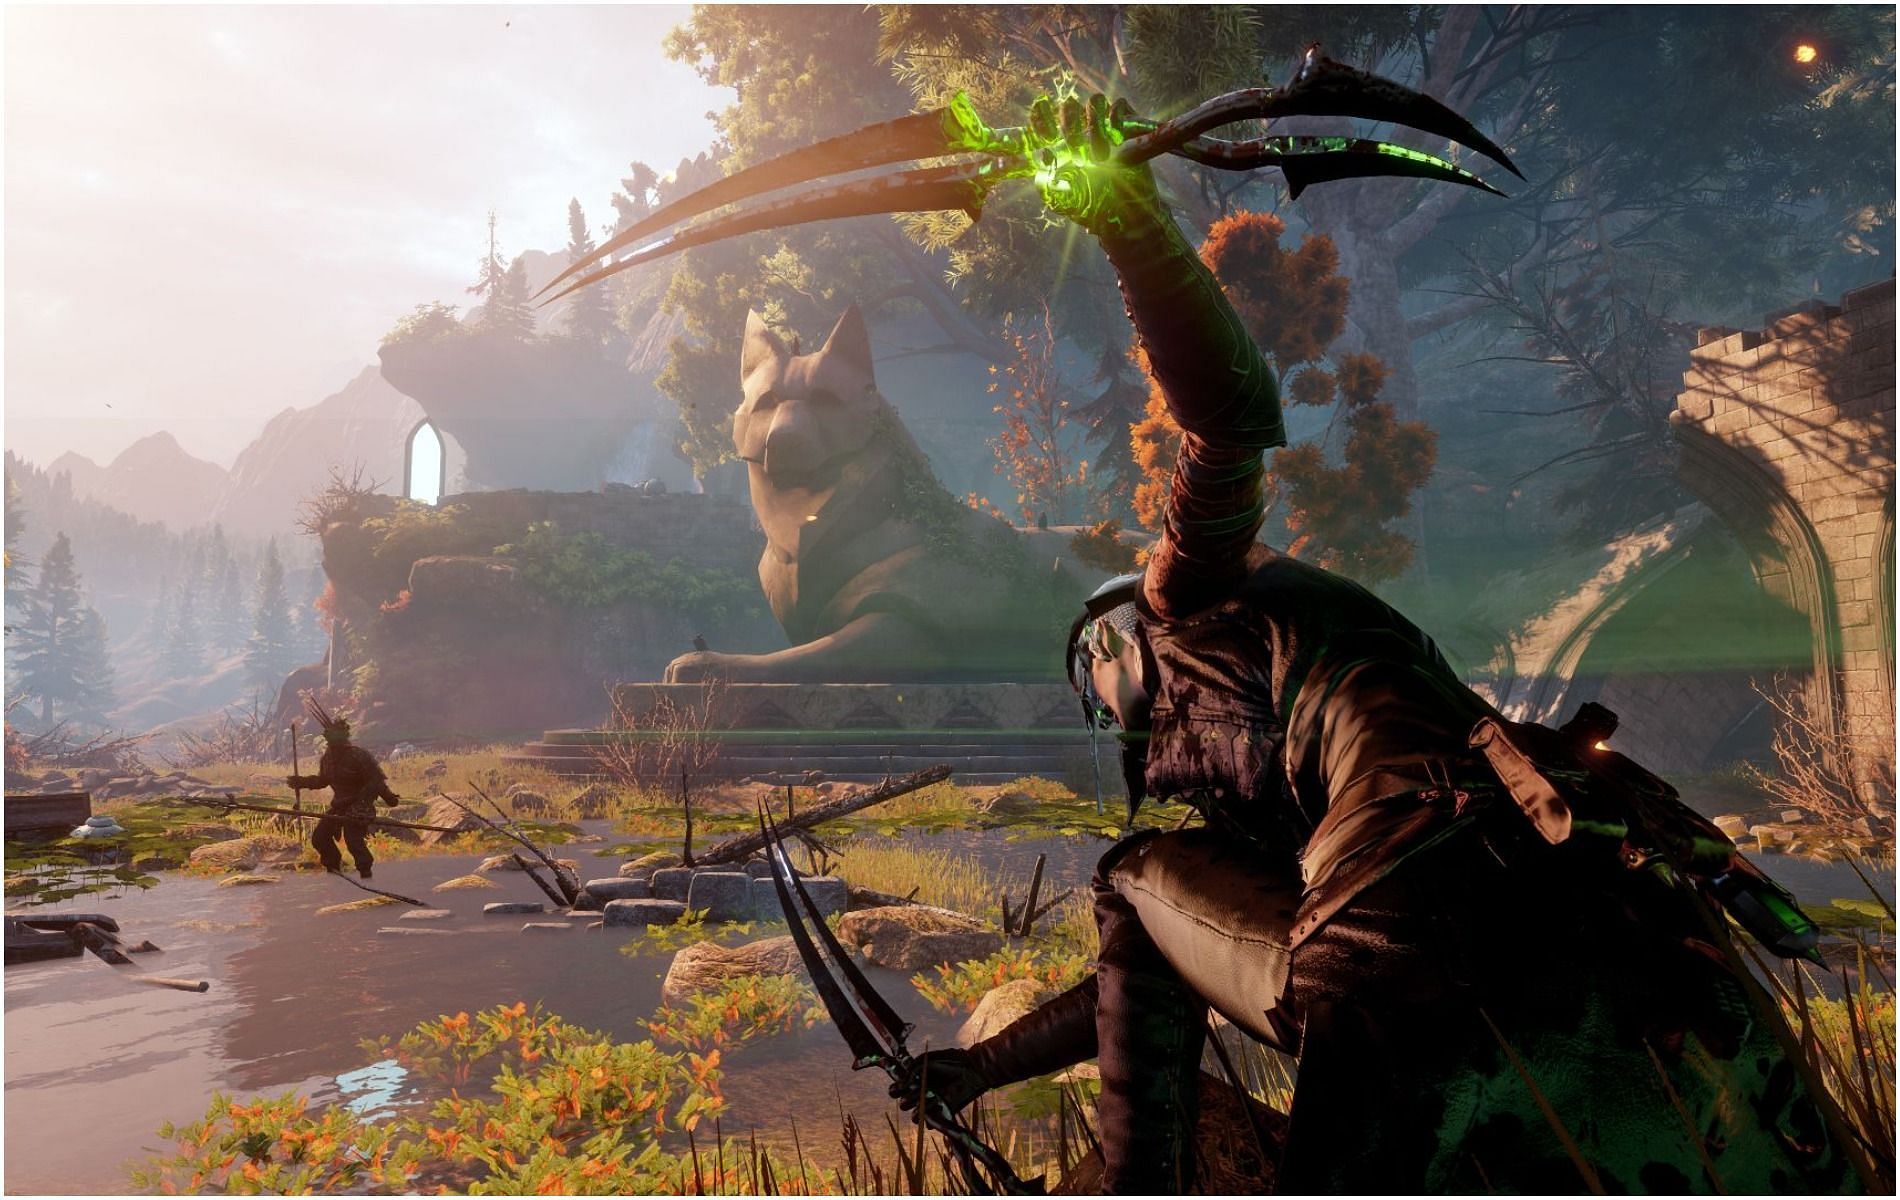 Dragon Age 4 expected to have its official launch in 2023 (Image via BioWare)